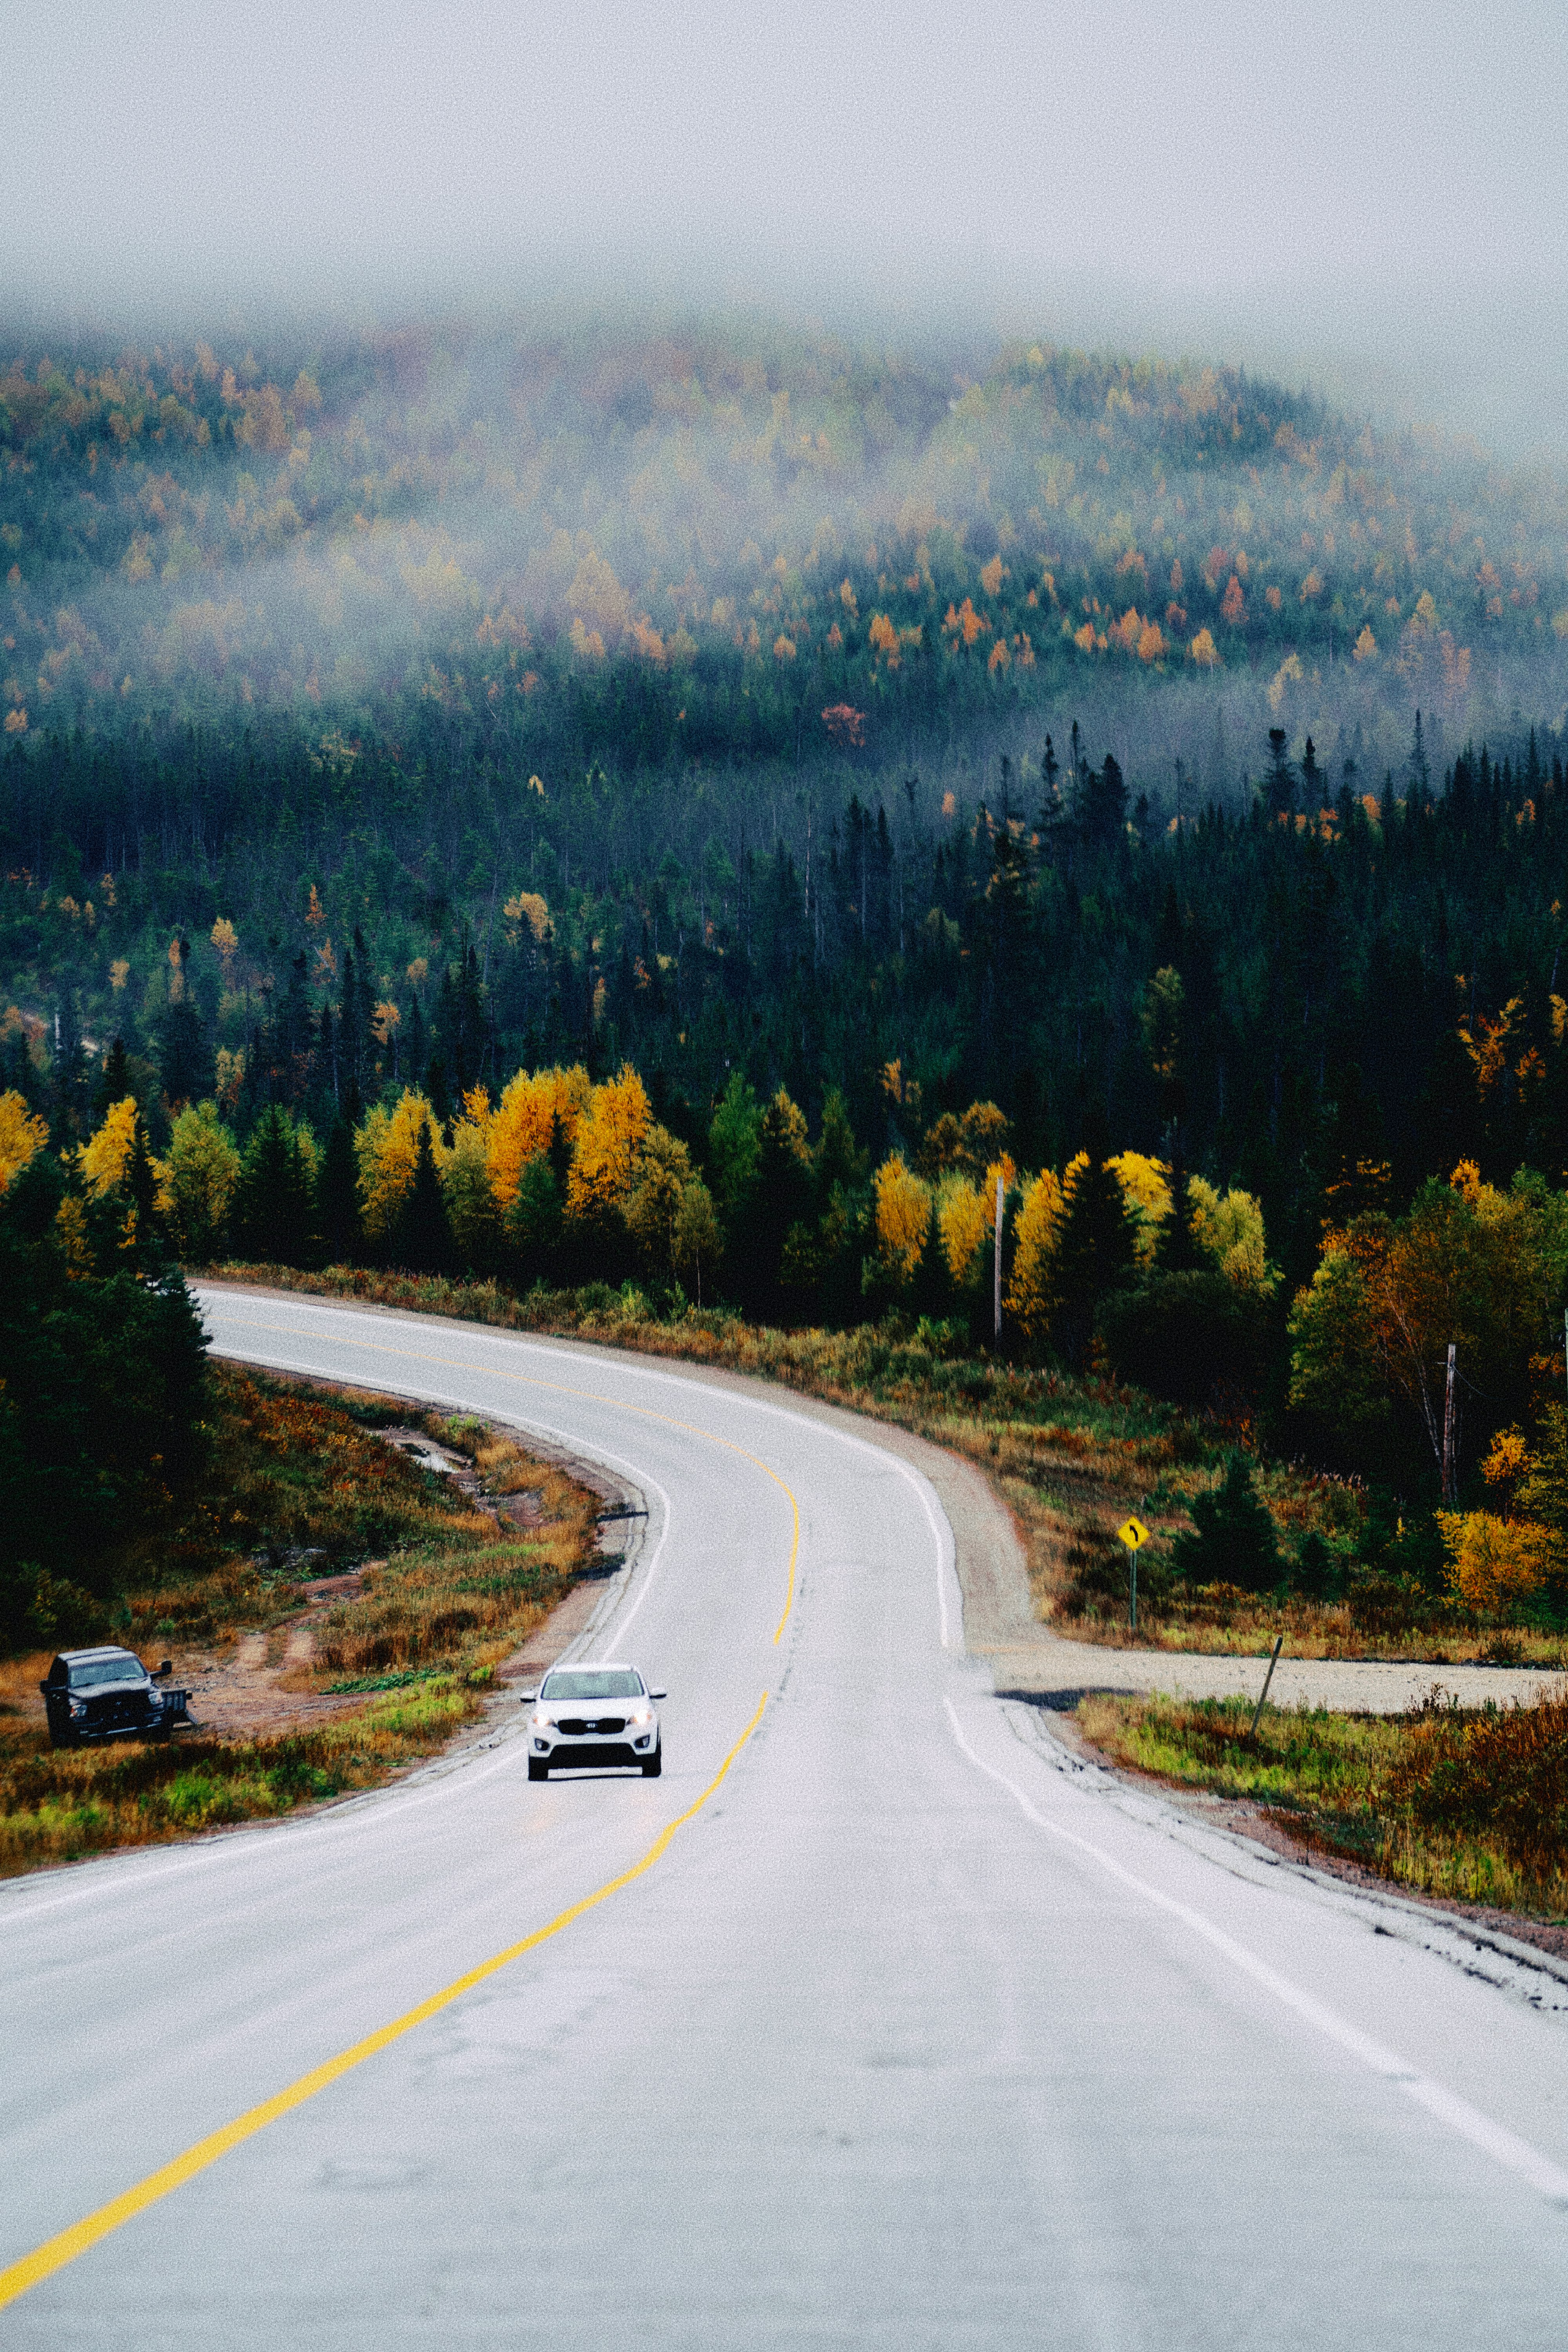 Car on a road in autumn
